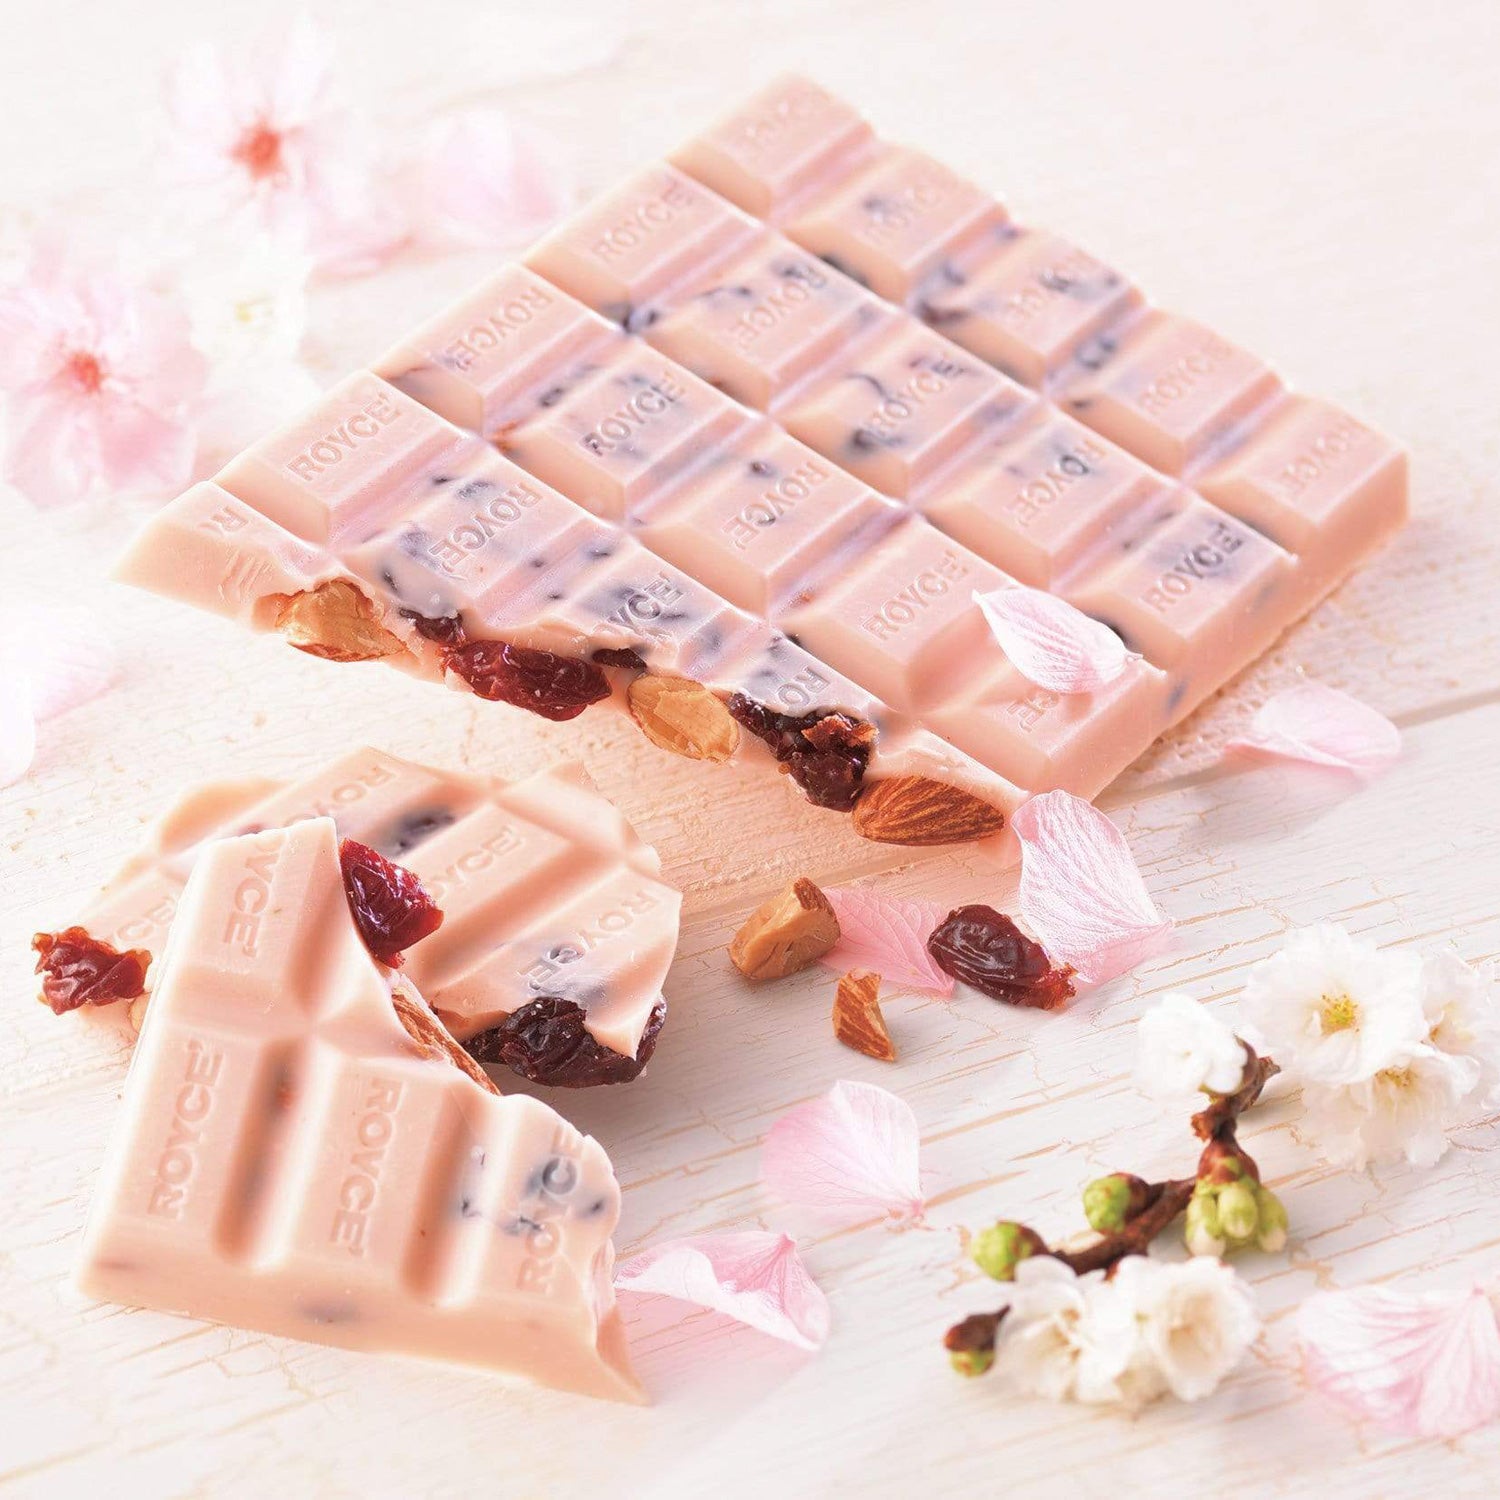 ROYCE' Chocolate - Chocolate Bar "Sakura Berry (Cherry & Almond)" - Image shows pink chocolate bars with dried cherries and almonds, as engraved with the word "ROYCE'". Accents include flowers in white and light pink with twigs in green and brown. Background is wood painted in white.